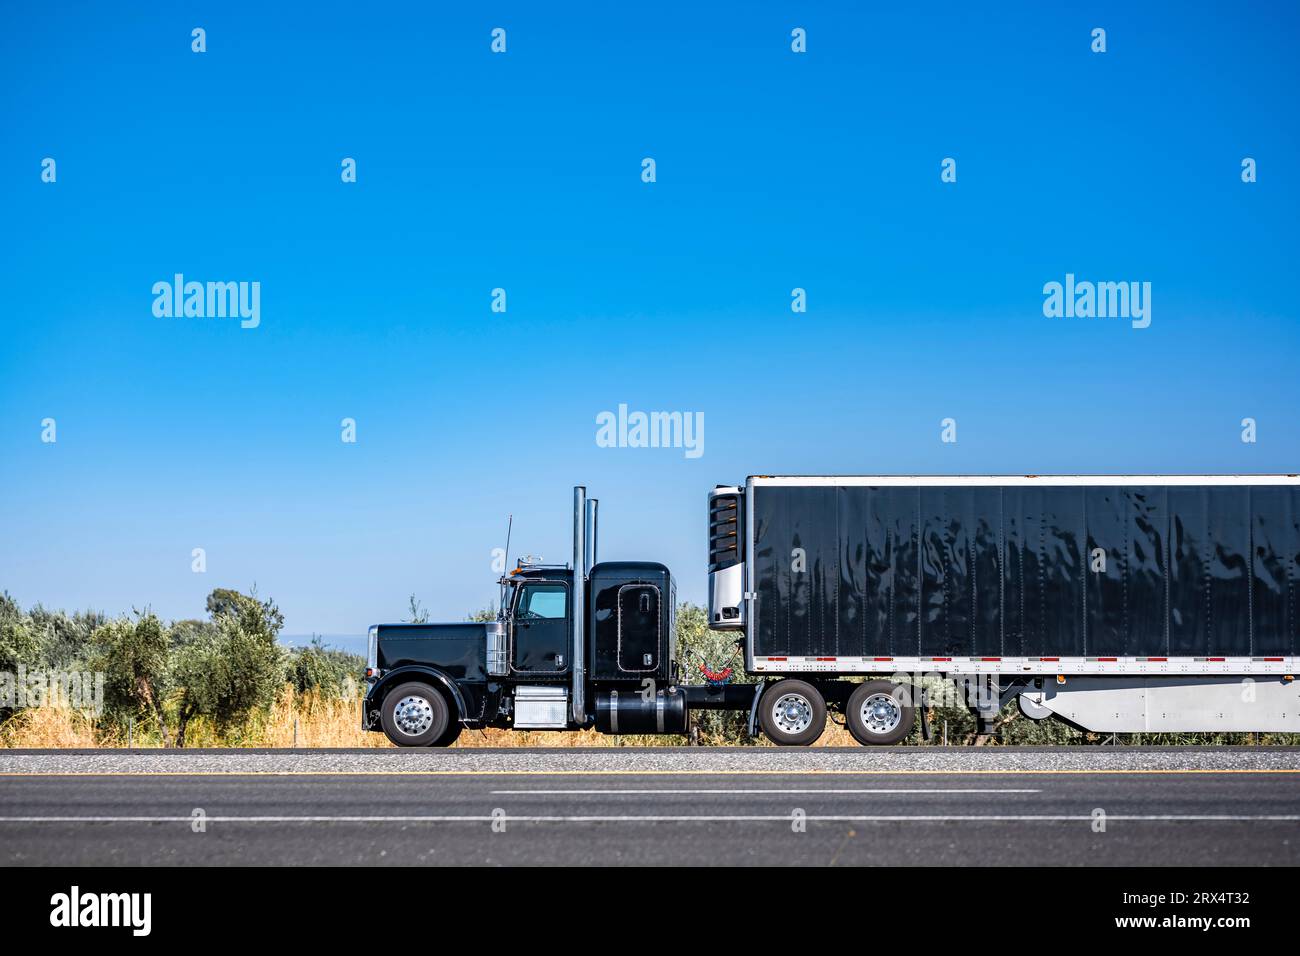 Industrial long hauler carrier black big rig semi truck tractor with extended cab for truck driver rest  transporting cargo in refrigerator semi trail Stock Photo